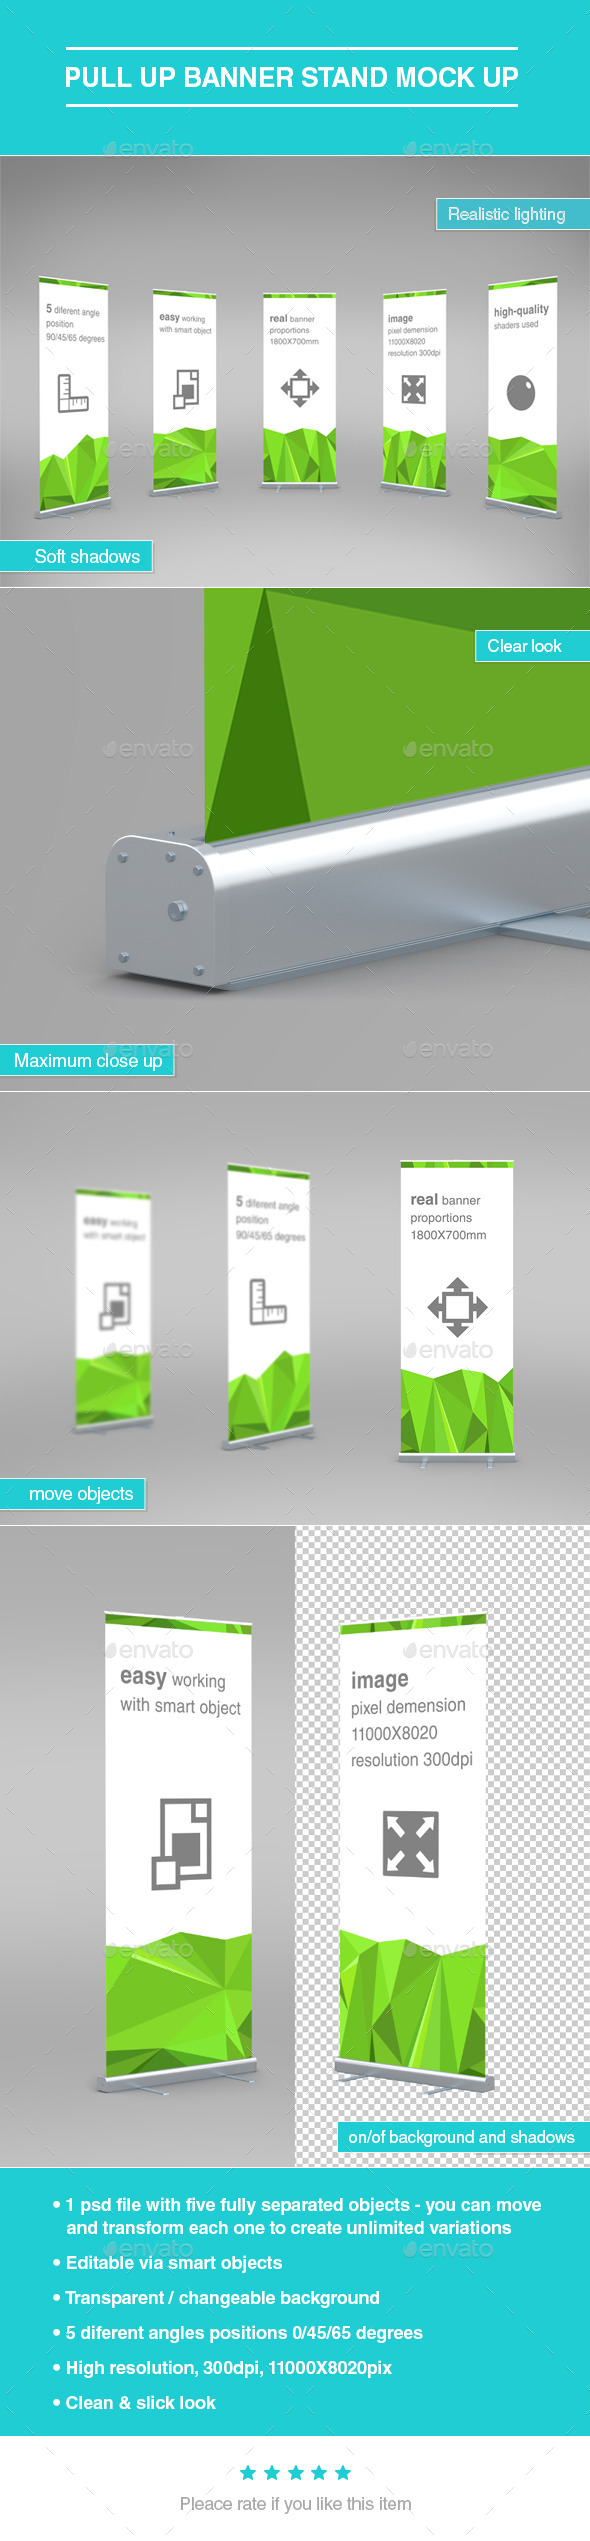 Pull Up Banner Stand Mock-Up - Product Mock-Ups Graphics